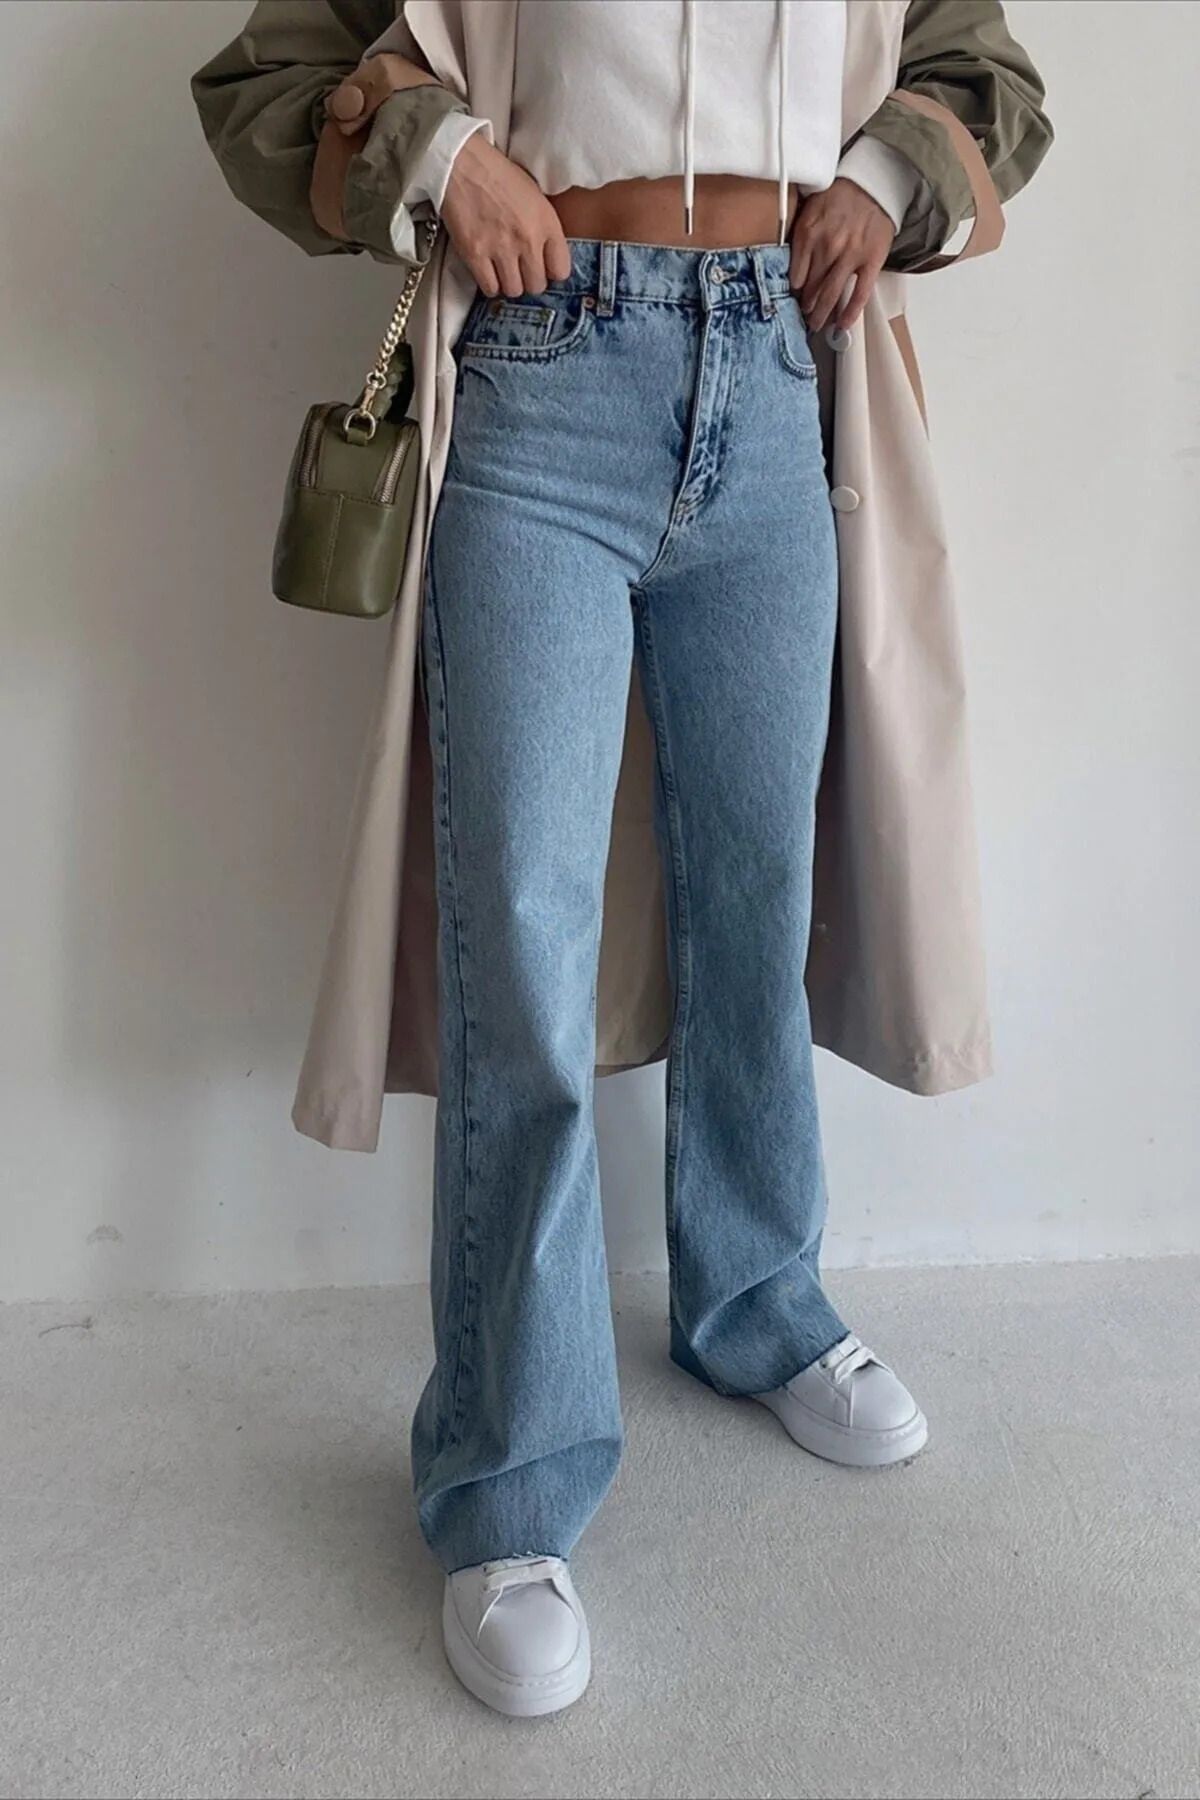 Blue Wide-leg Jeans With Studs, Jeans Turn Legs Blue